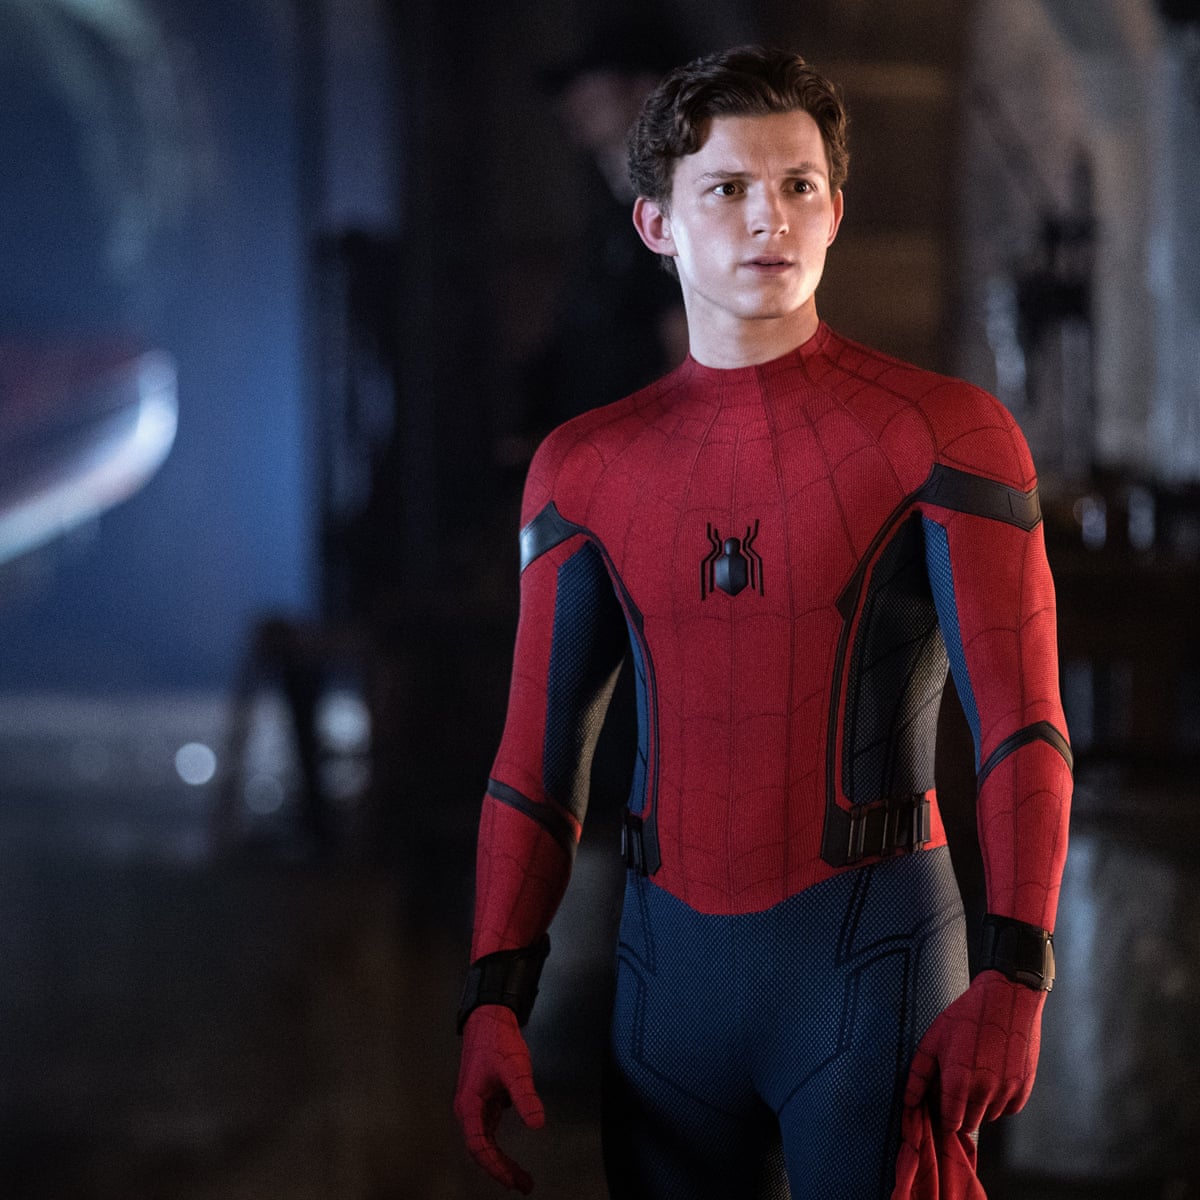 Spider-Man: Far from Home leaves Marvel in its darkest place yet ...